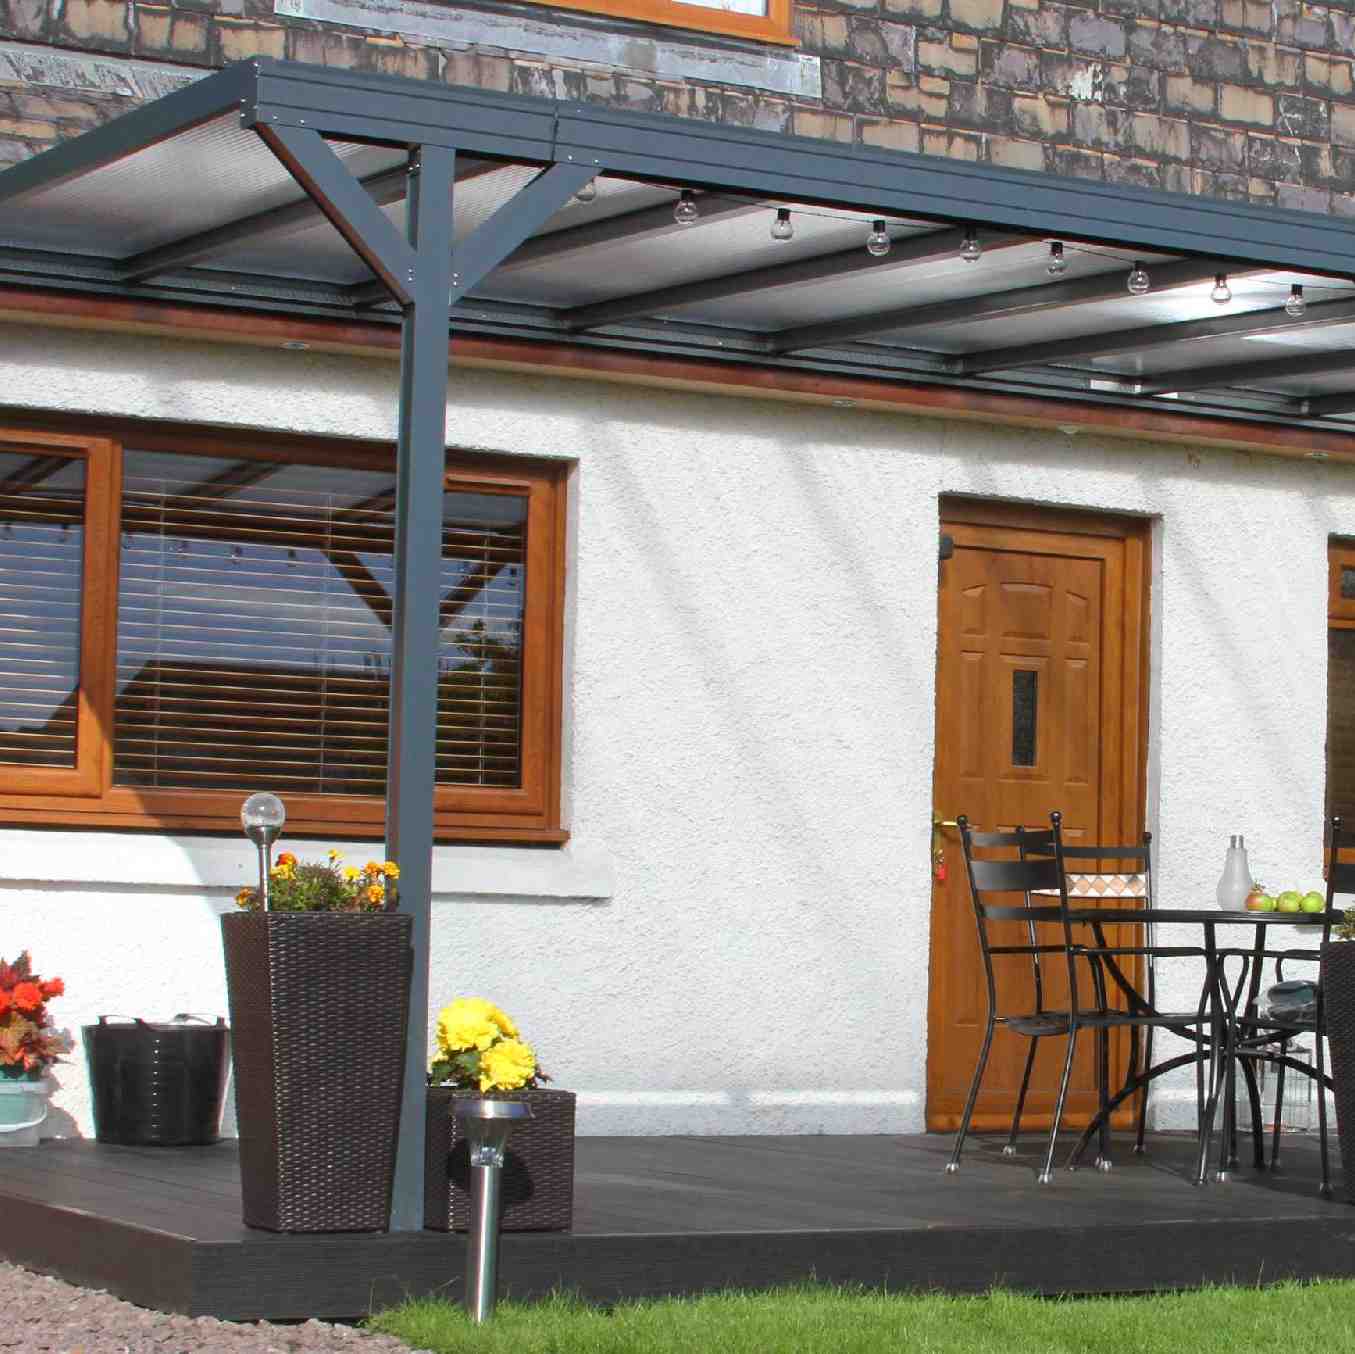 Omega Verandah, Anthracite Grey, 16mm Polycarbonate Glazing - 7.8m (W) x 3.5m (P), (4) Supporting Posts